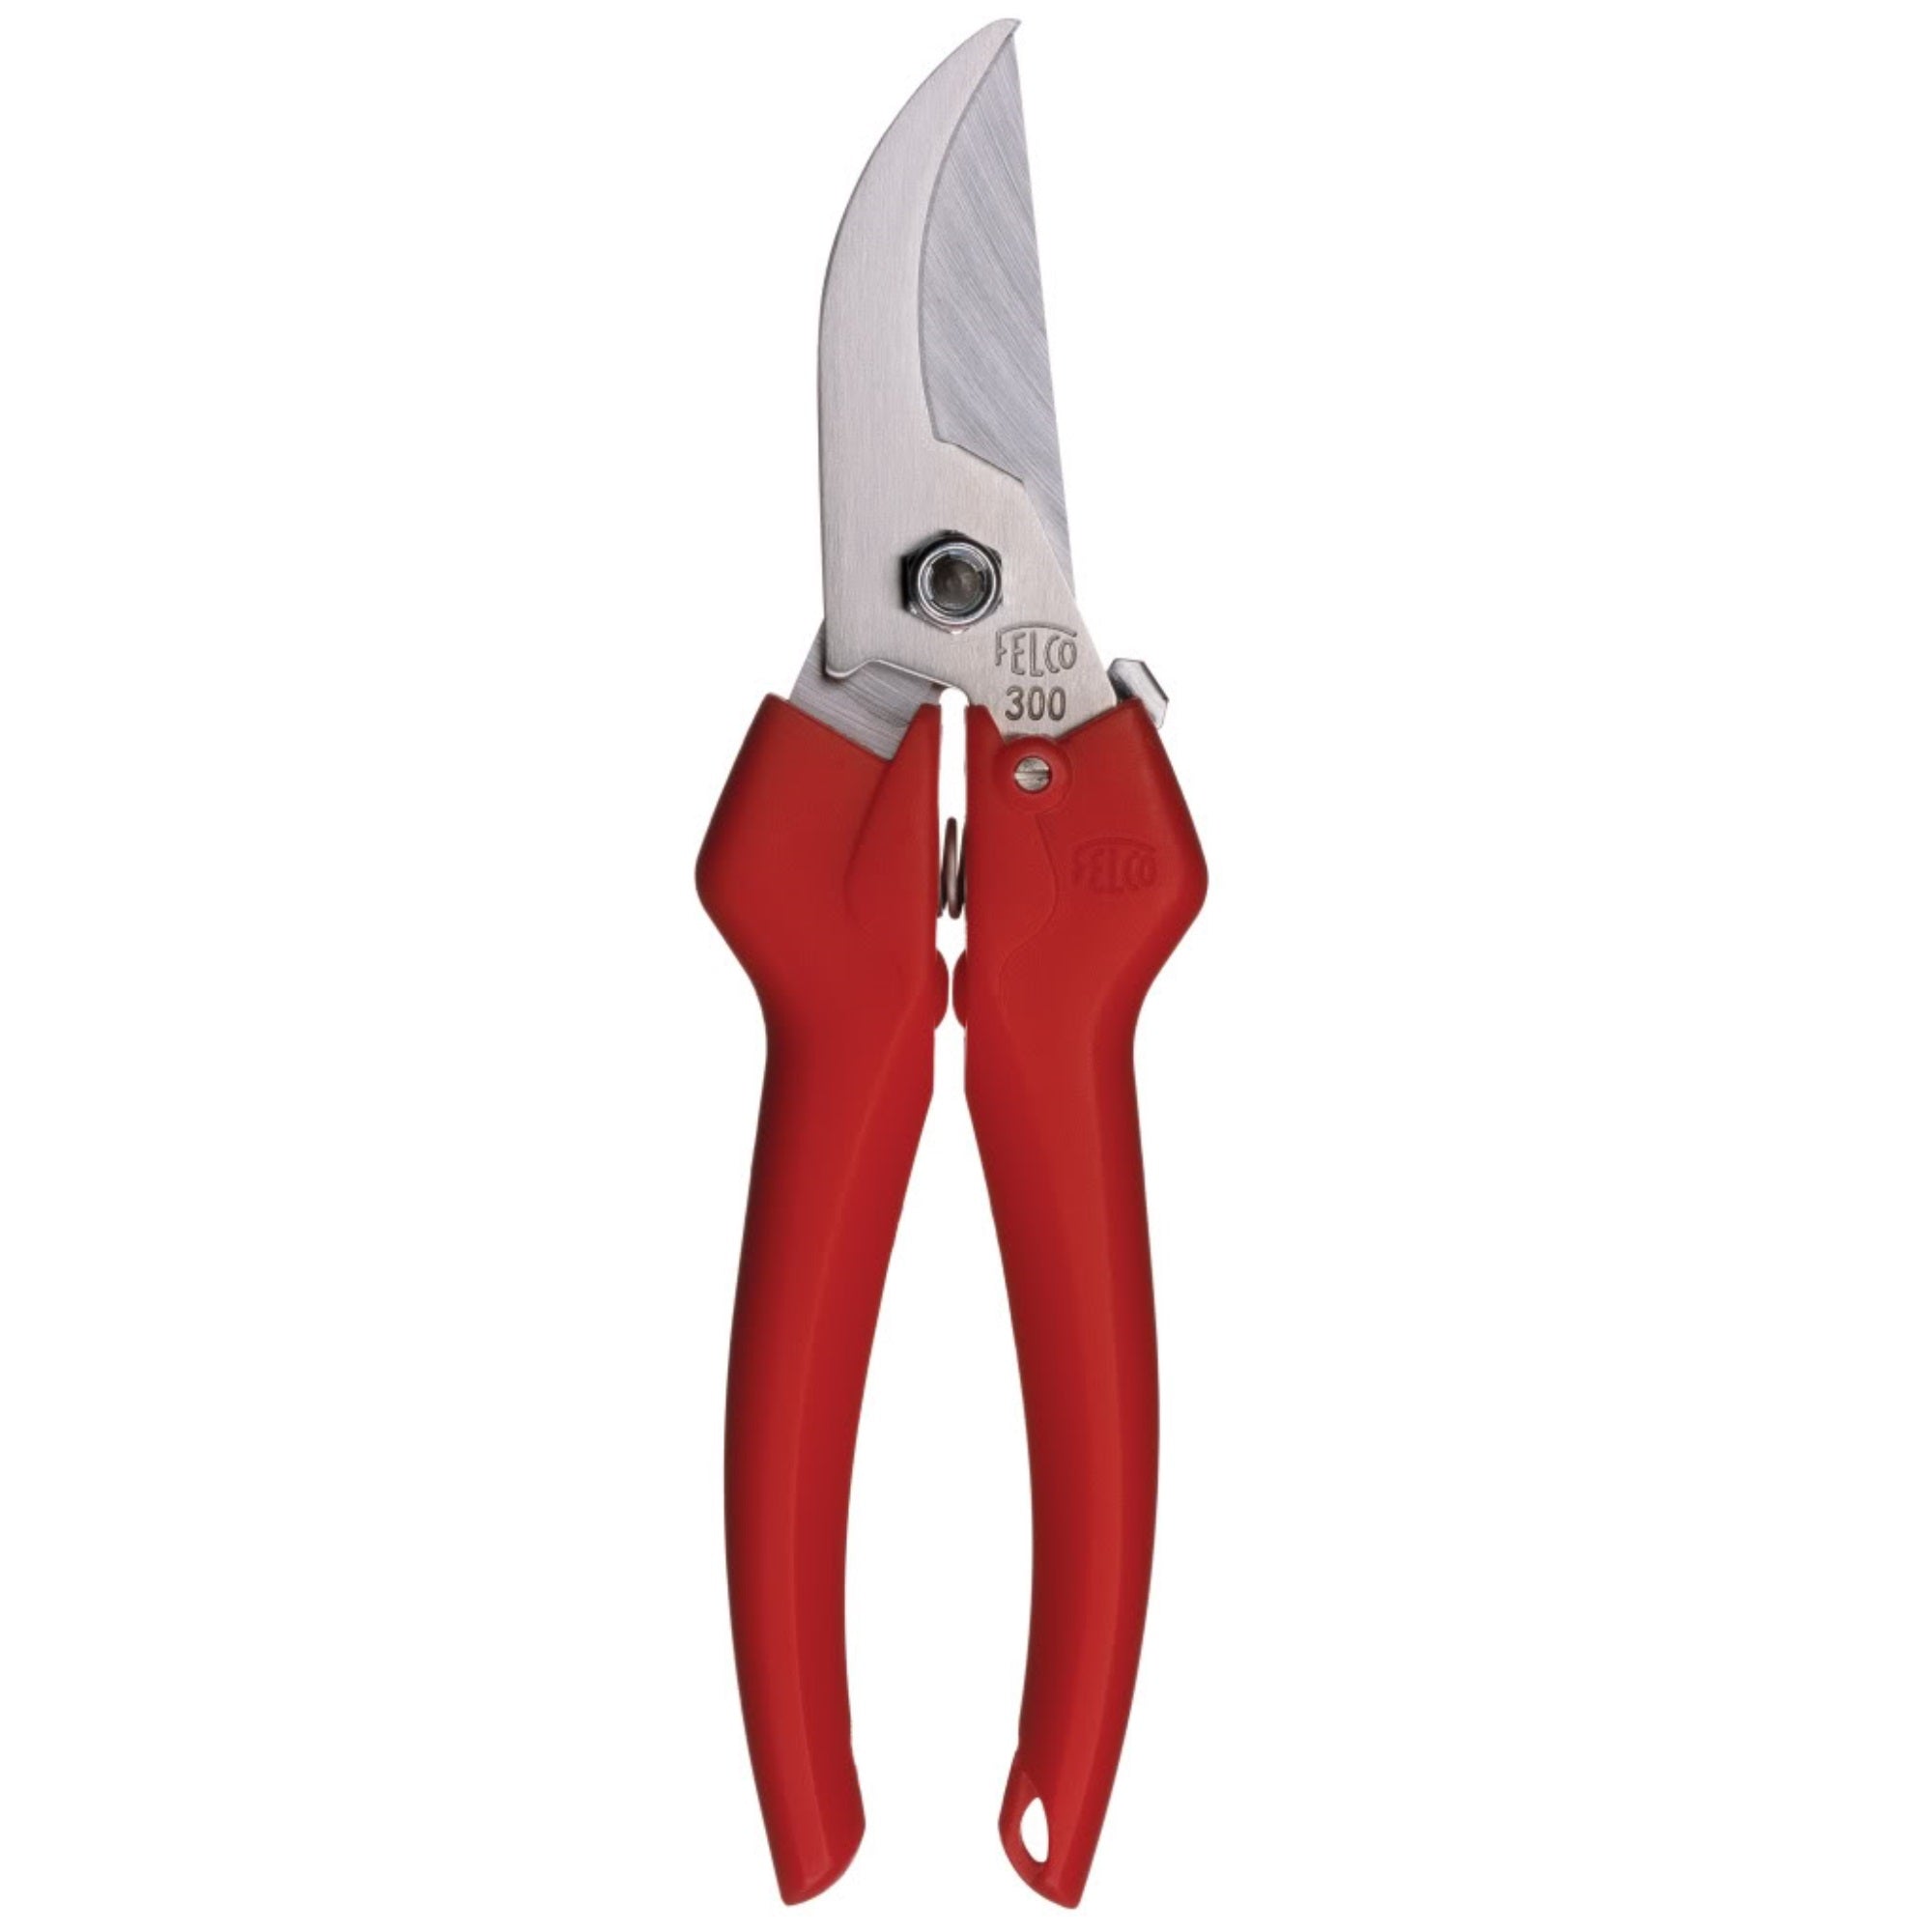 Felco Picking and Trimming Clean Cut Garden Snips